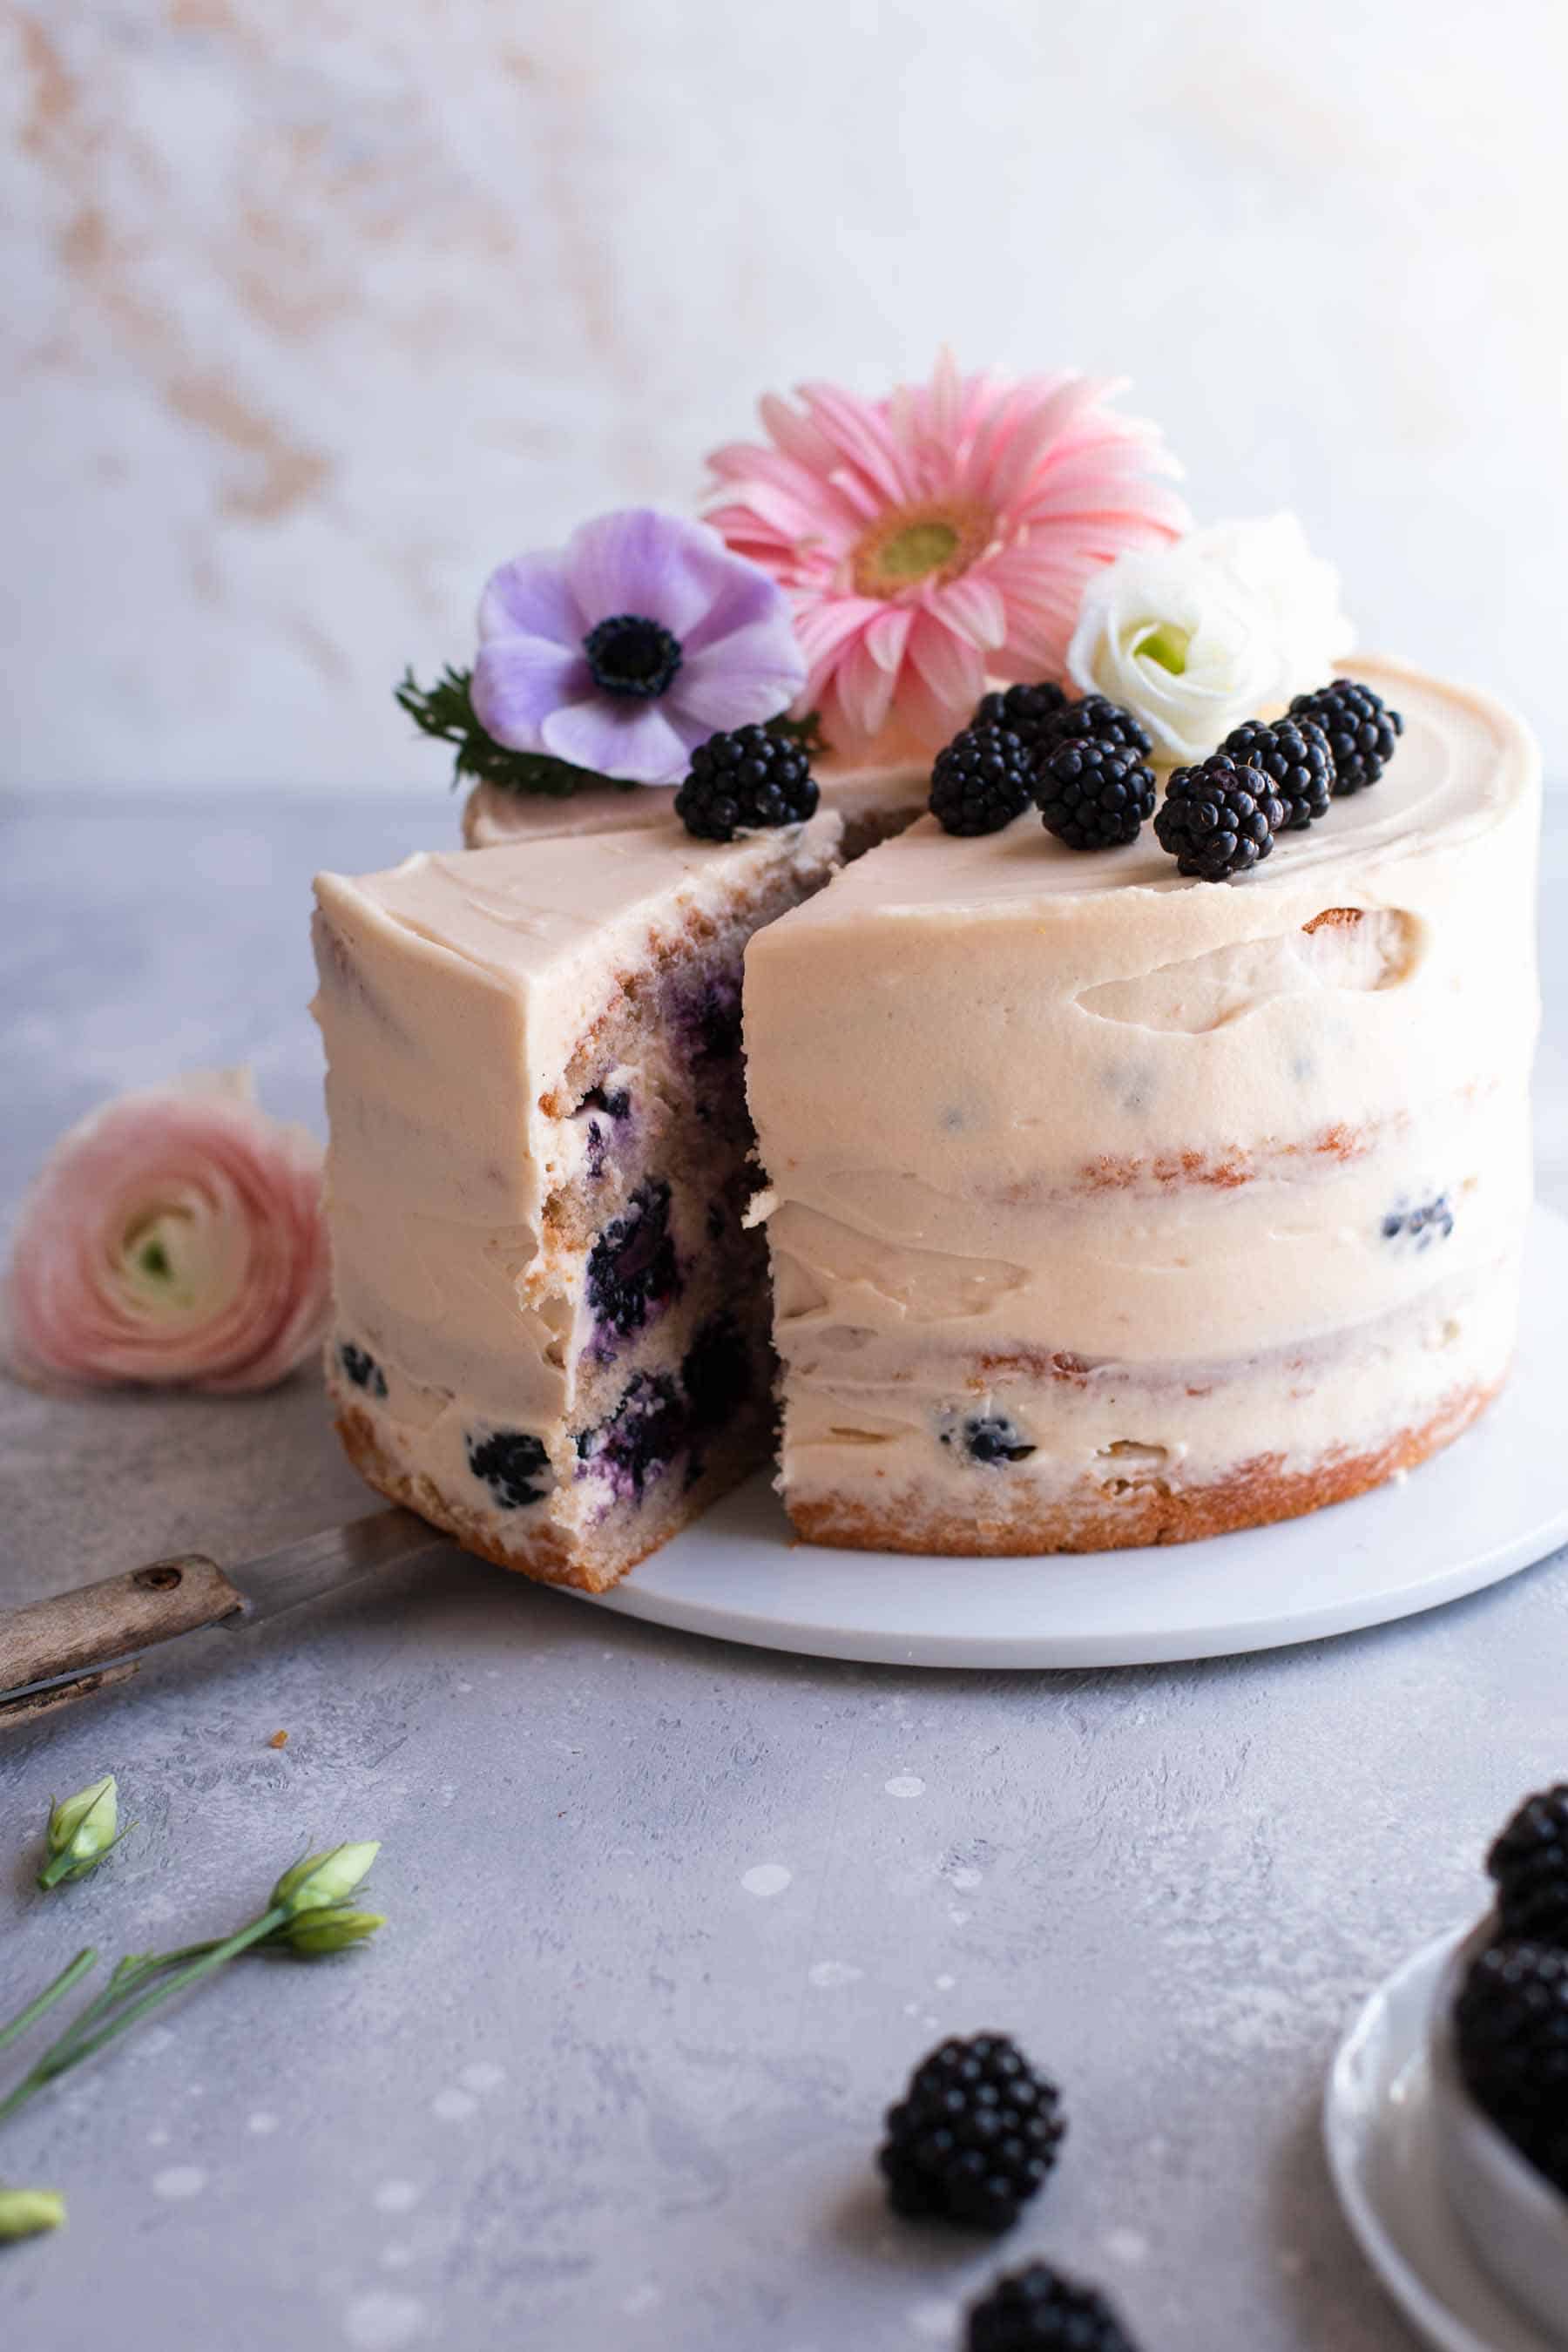 Blackberry cake with flower decoration on a serving plate that has a slice taken out